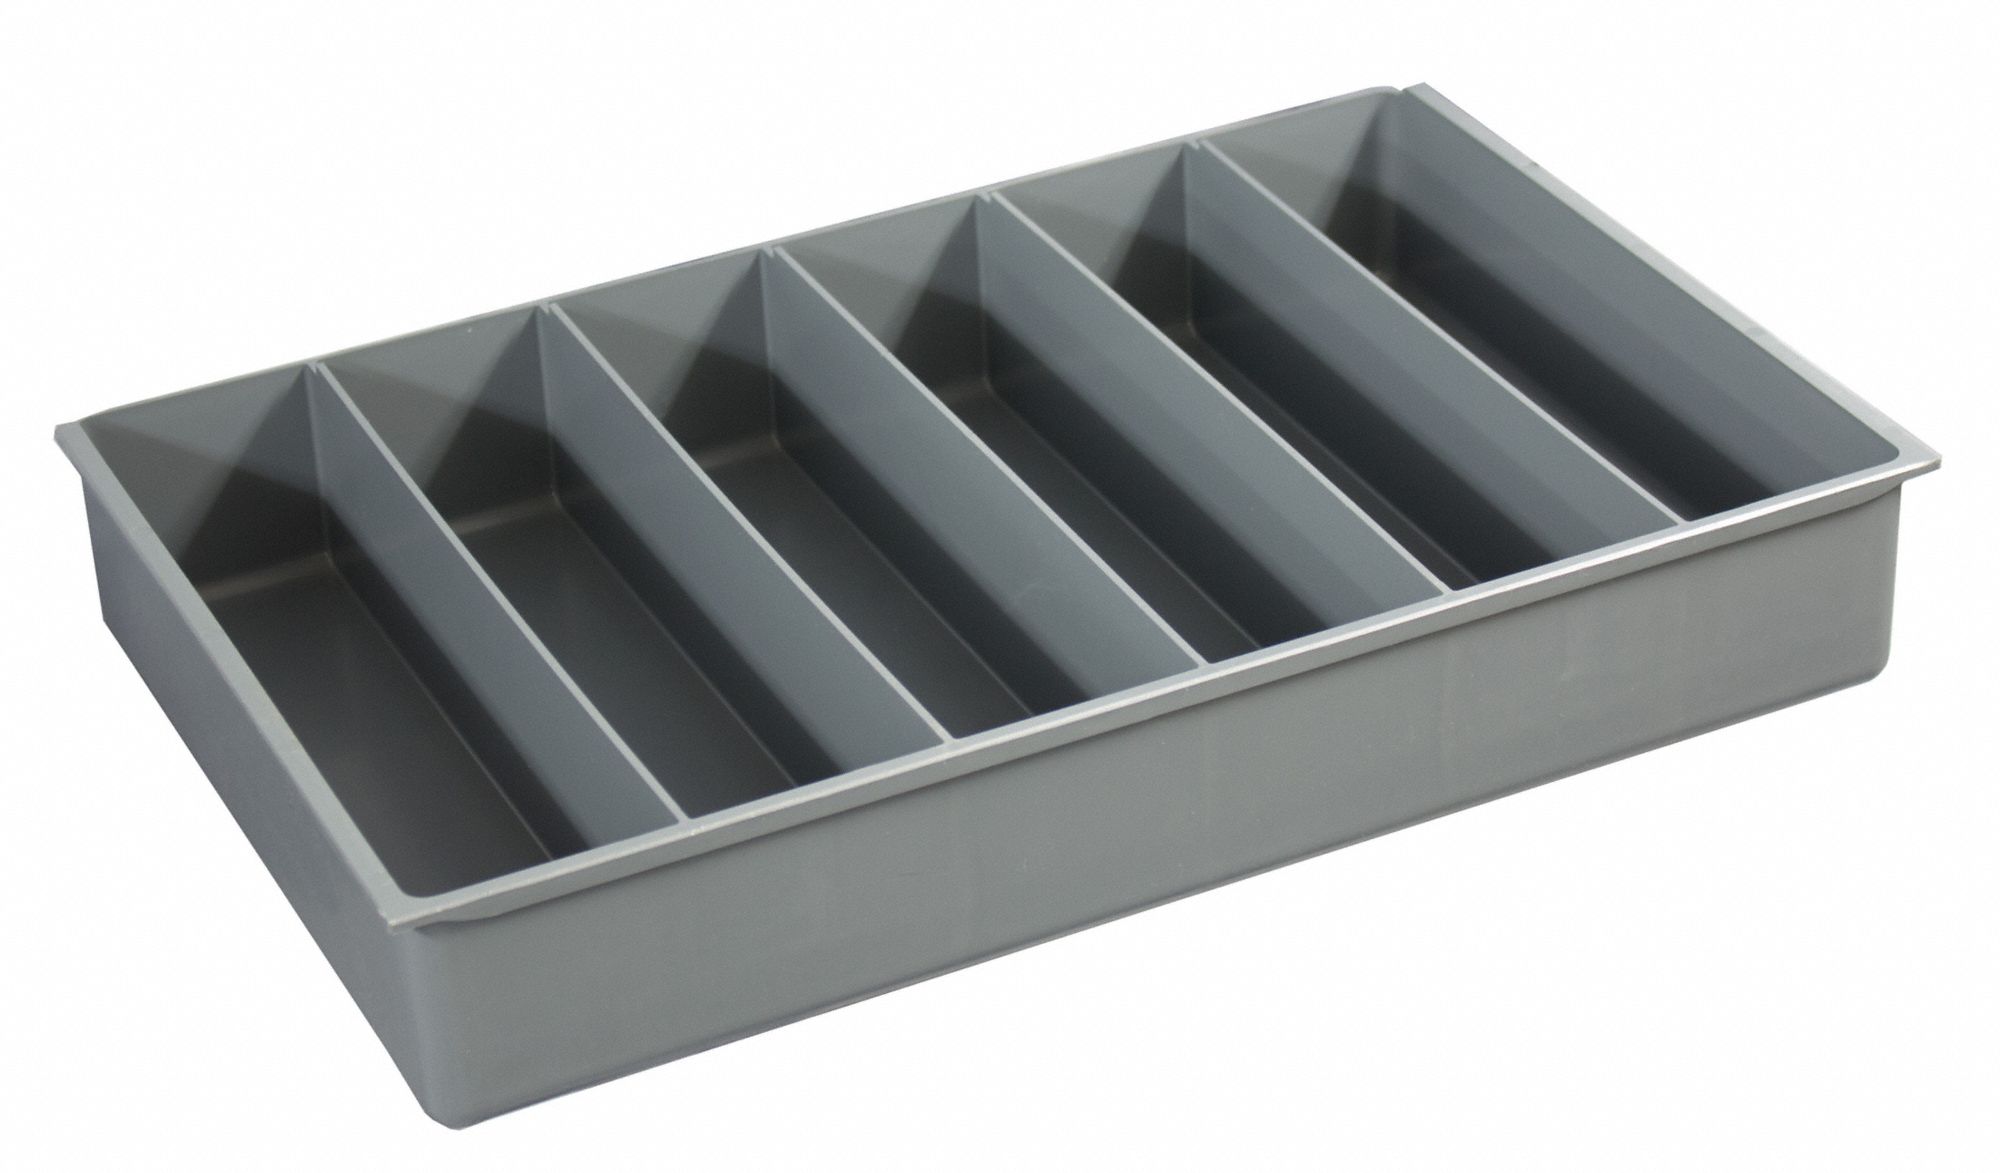 DURHAM MFG Plastic Compartment Drawer Insert, Compartments per Drawer